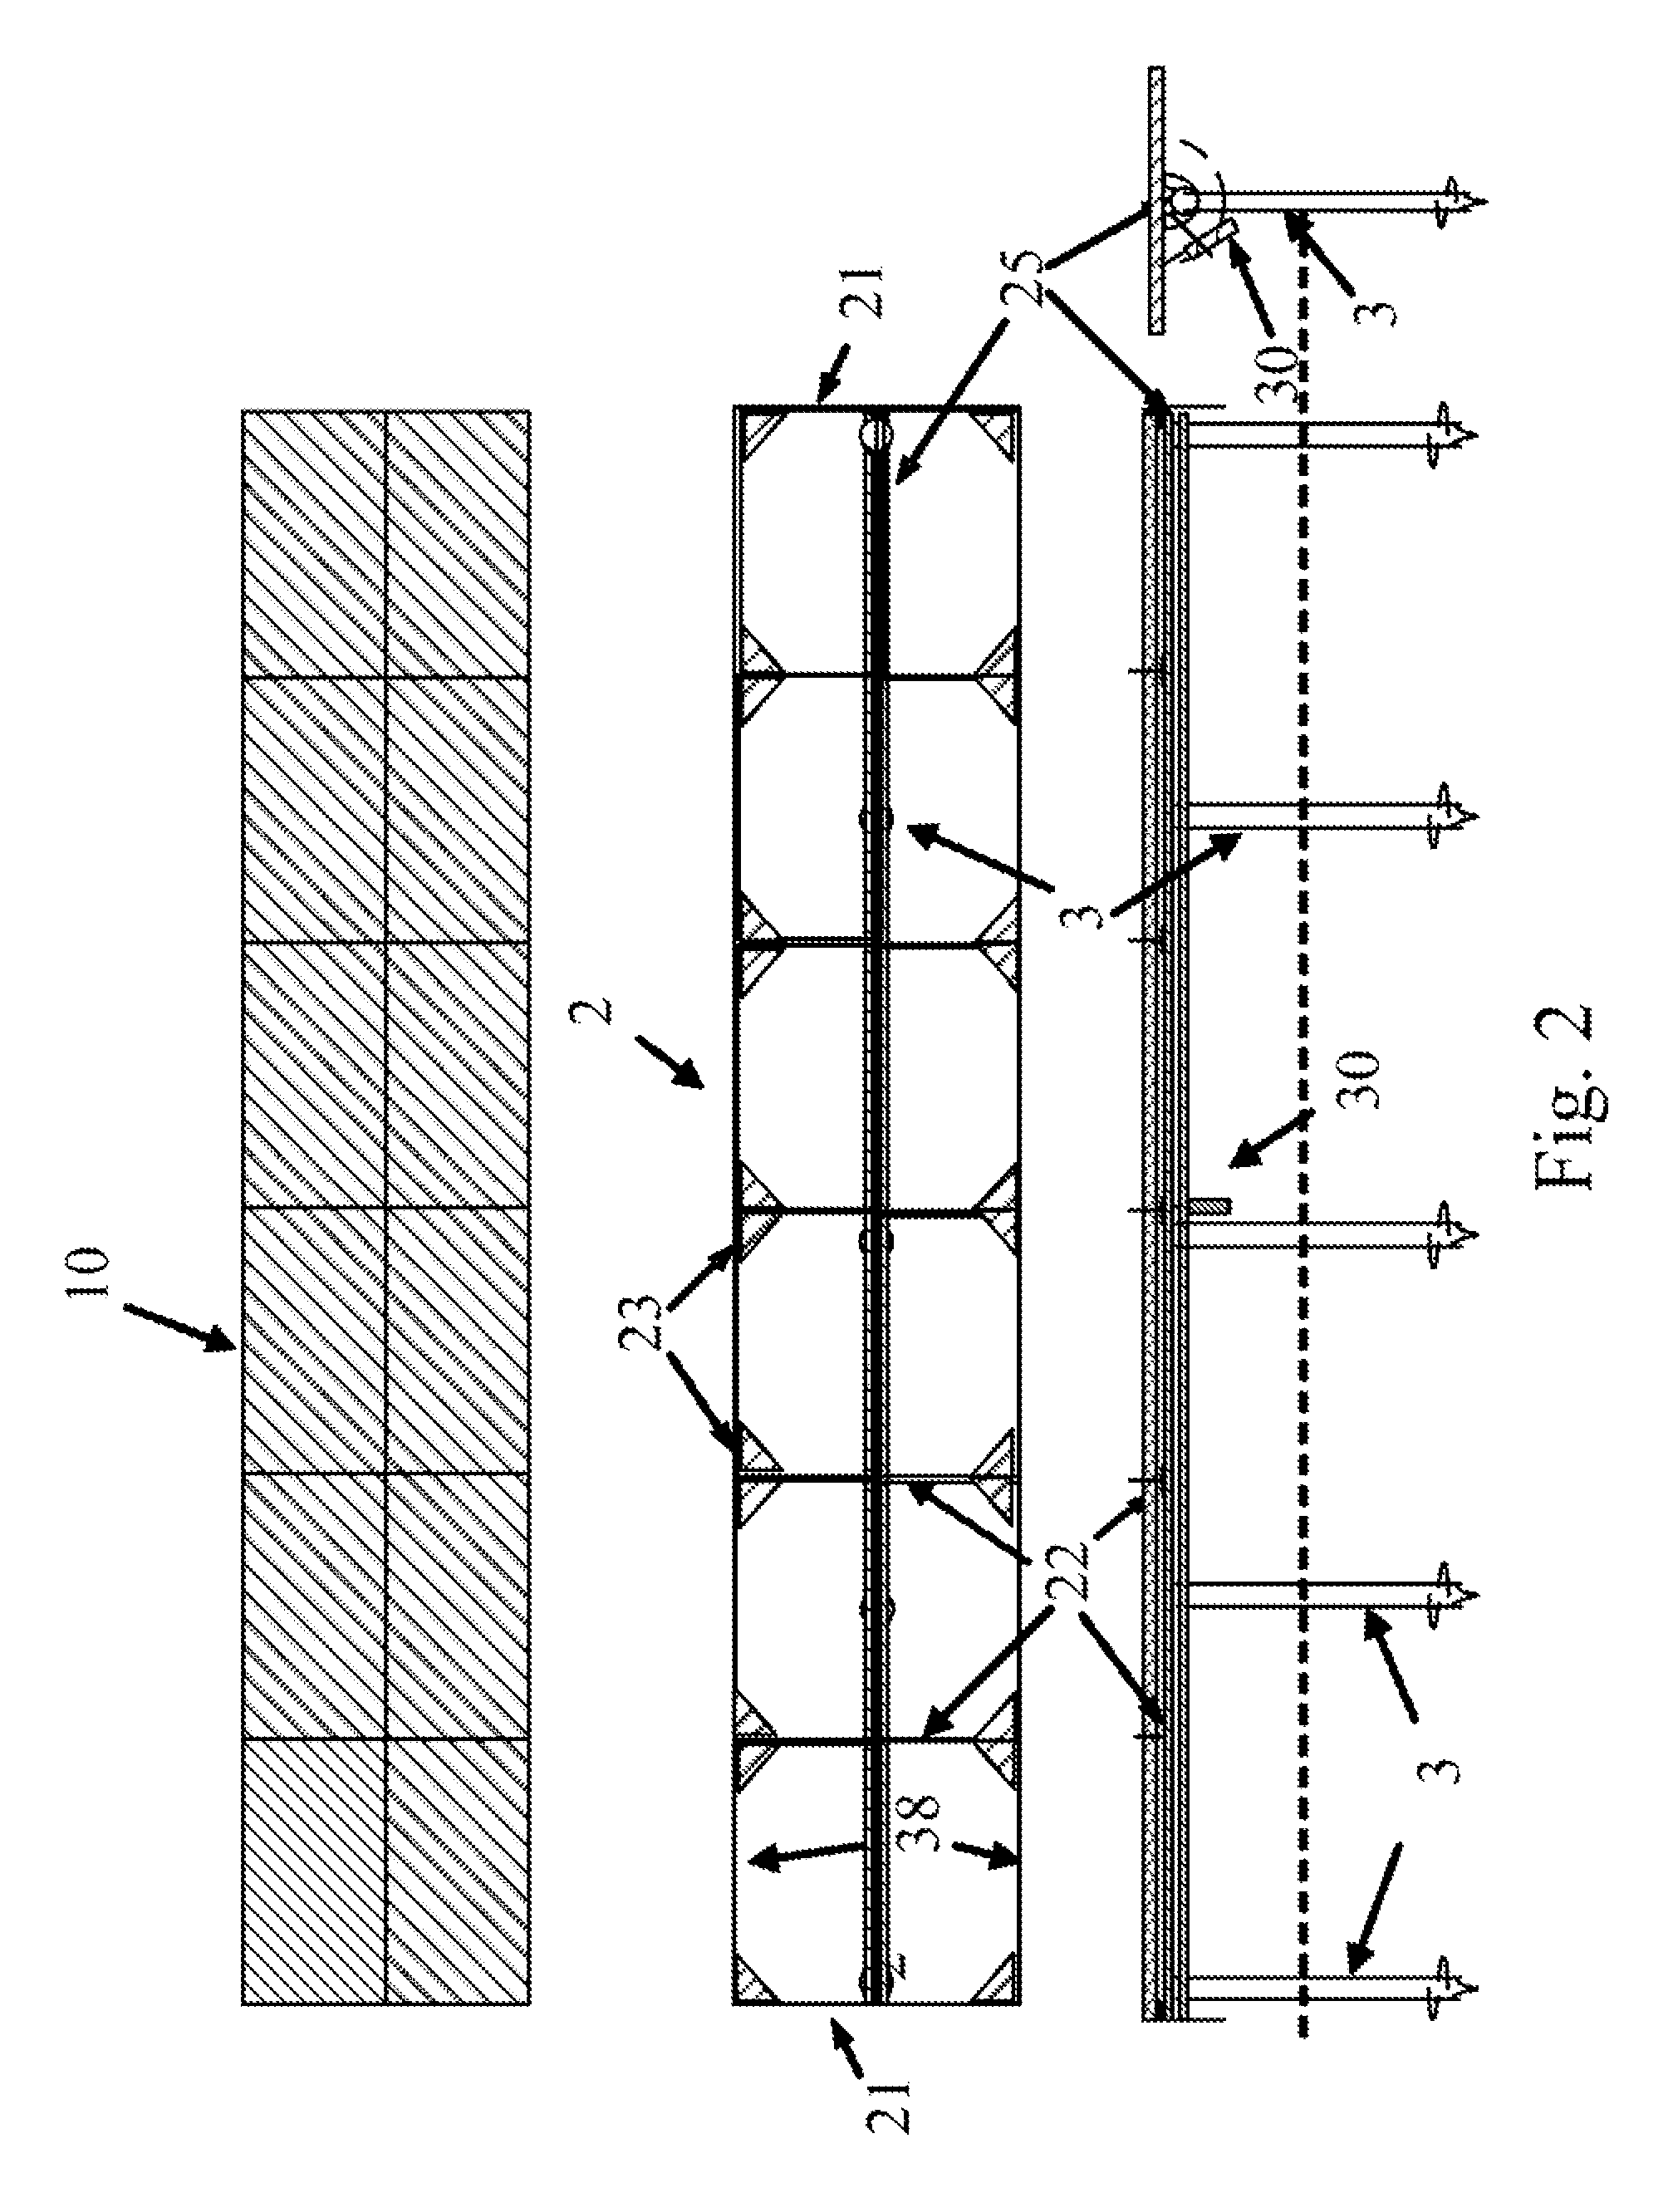 One-axis solar tracker system and apparatus with wind lock devices